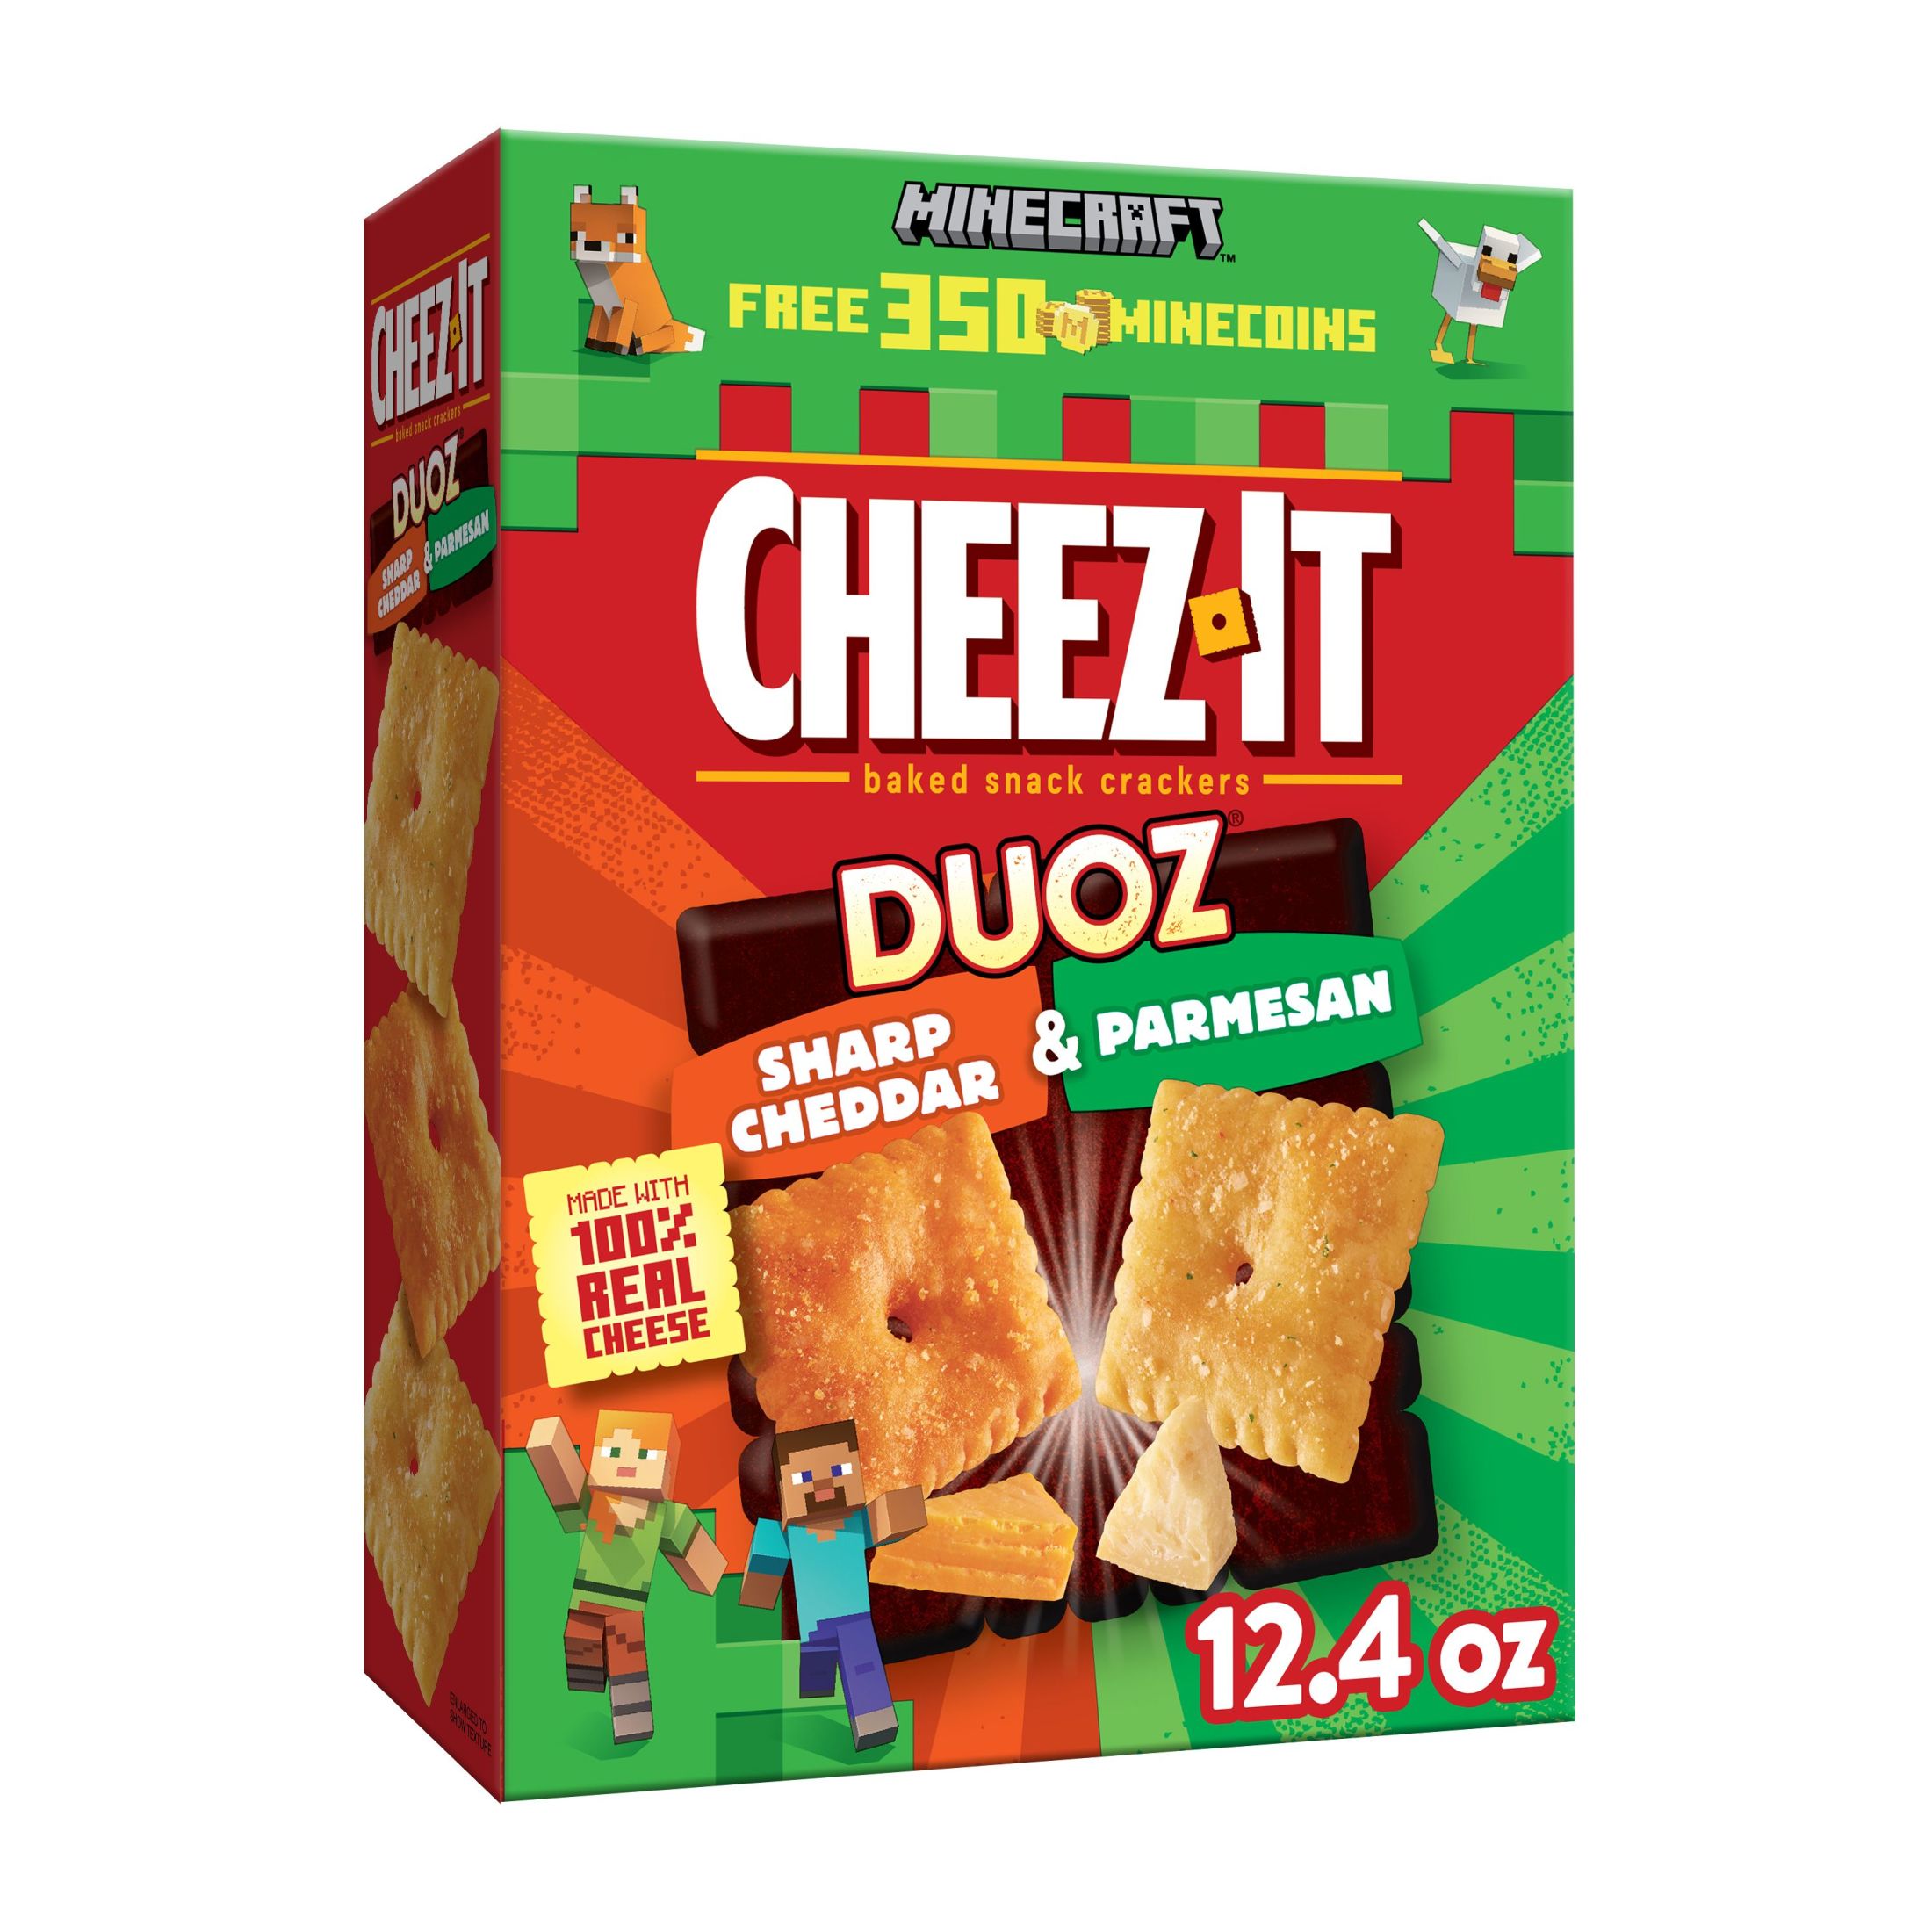 Cheez-It DUOZ Sharp Cheddar and Parmesan Cheese Crackers, Baked Snack Crackers, 12.4 oz - image 1 of 12